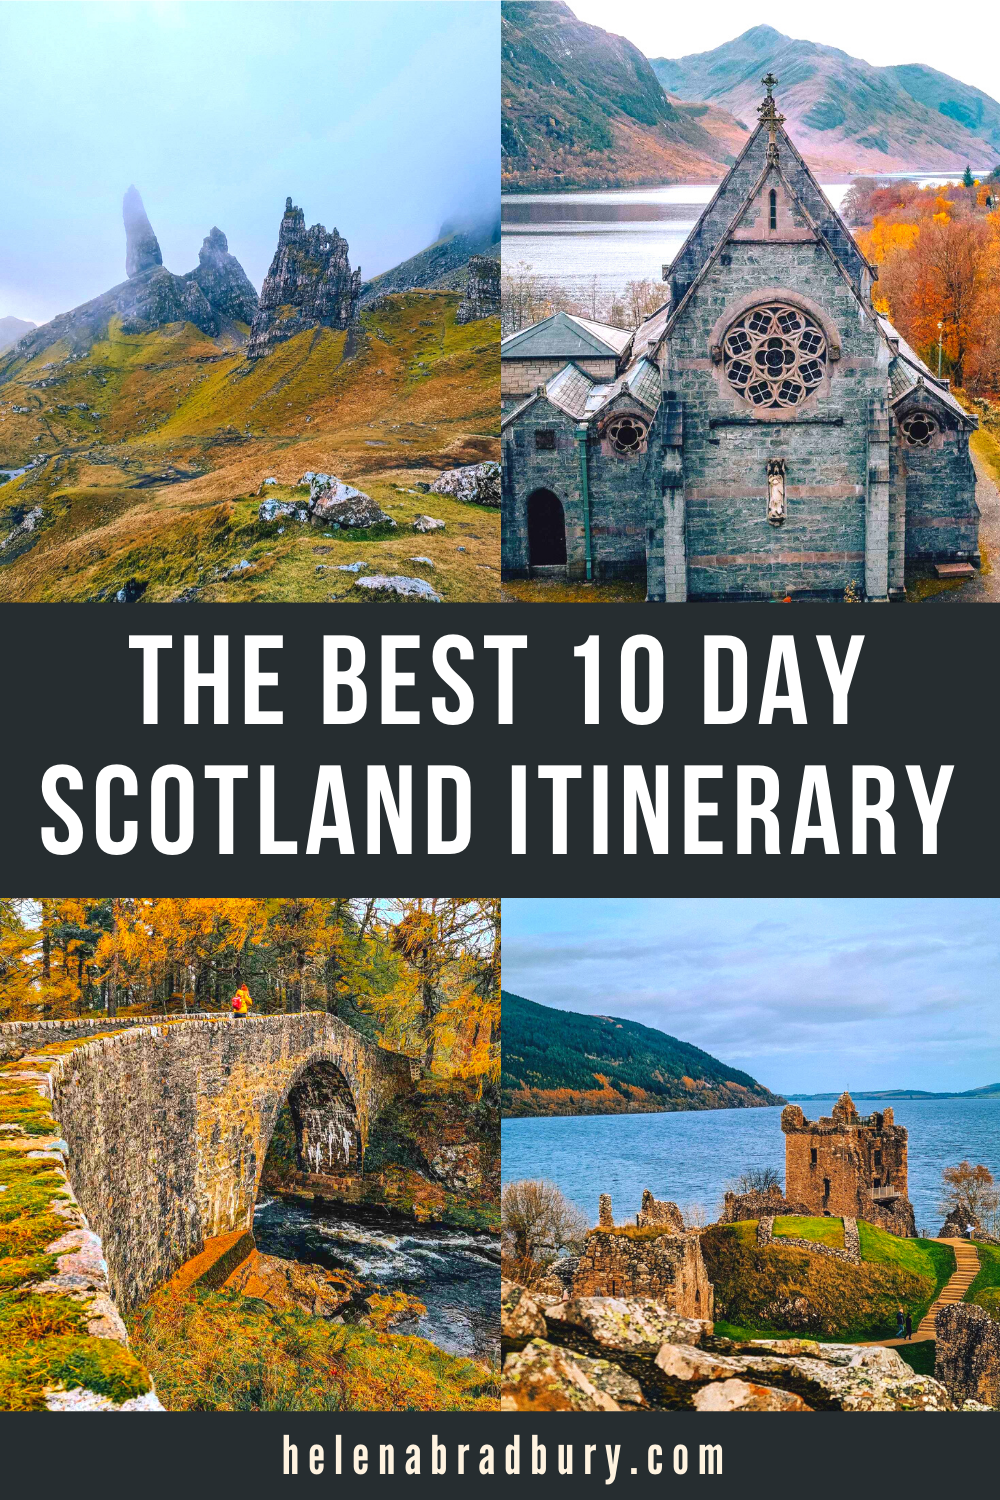 Planning 10 days in Scotland? This 10 day Scotland road trip itinerary includes everything from travel distances, advice for weather conditions, Scottish attractions to visit, plus accommodation throughout to plan the ultimate Scotland itinerary | sc